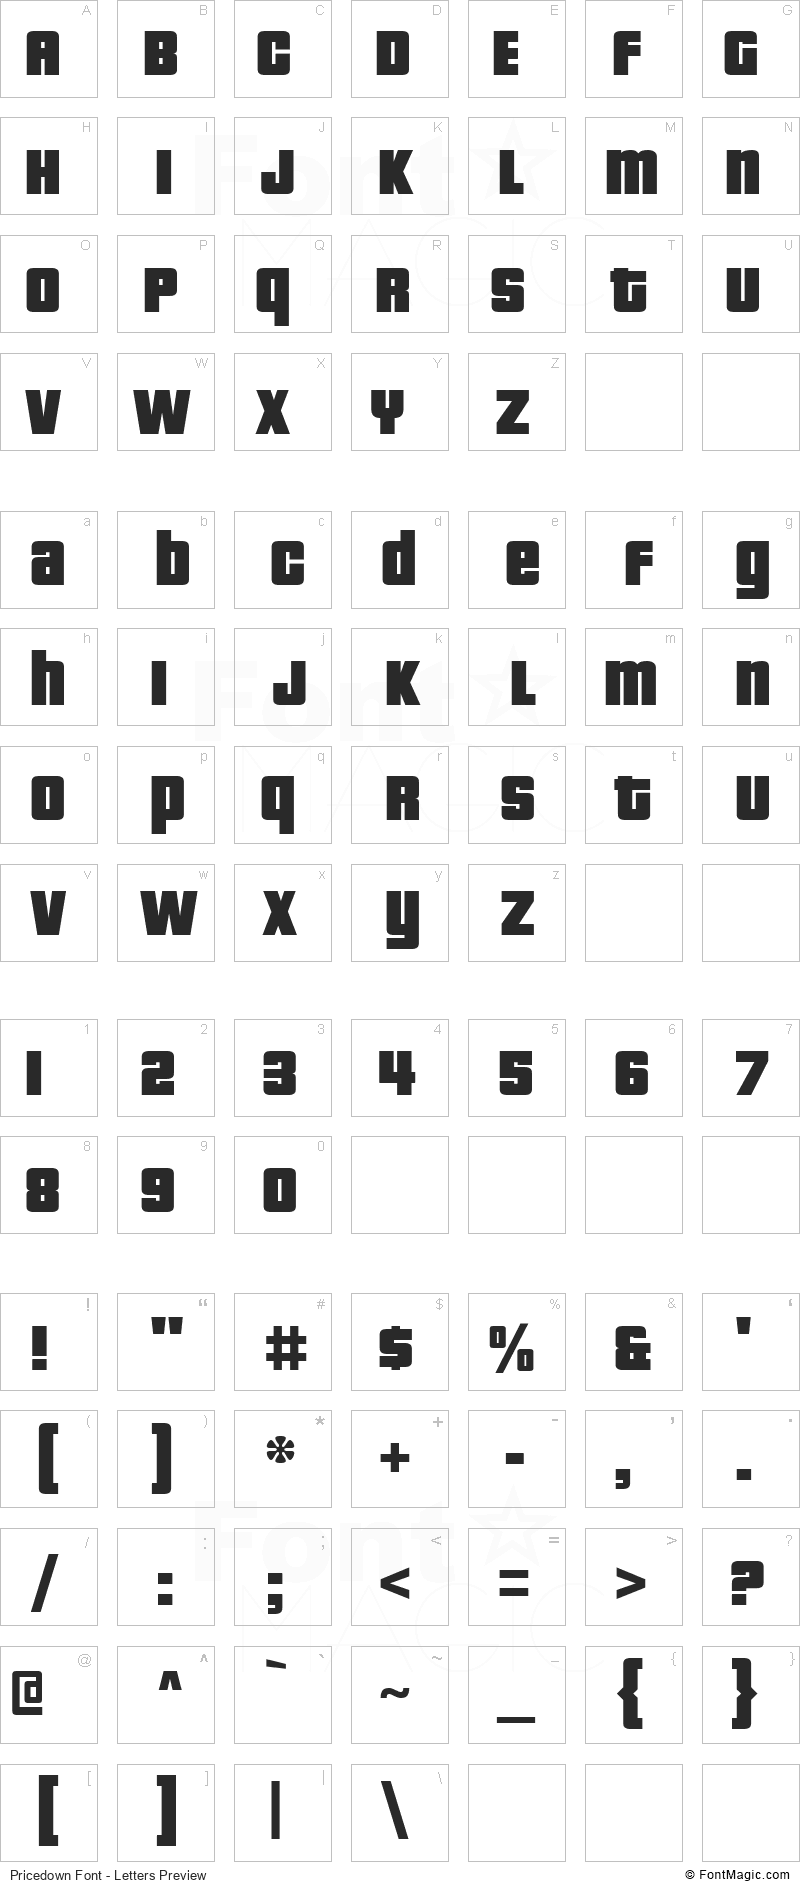 Pricedown Font - All Latters Preview Chart